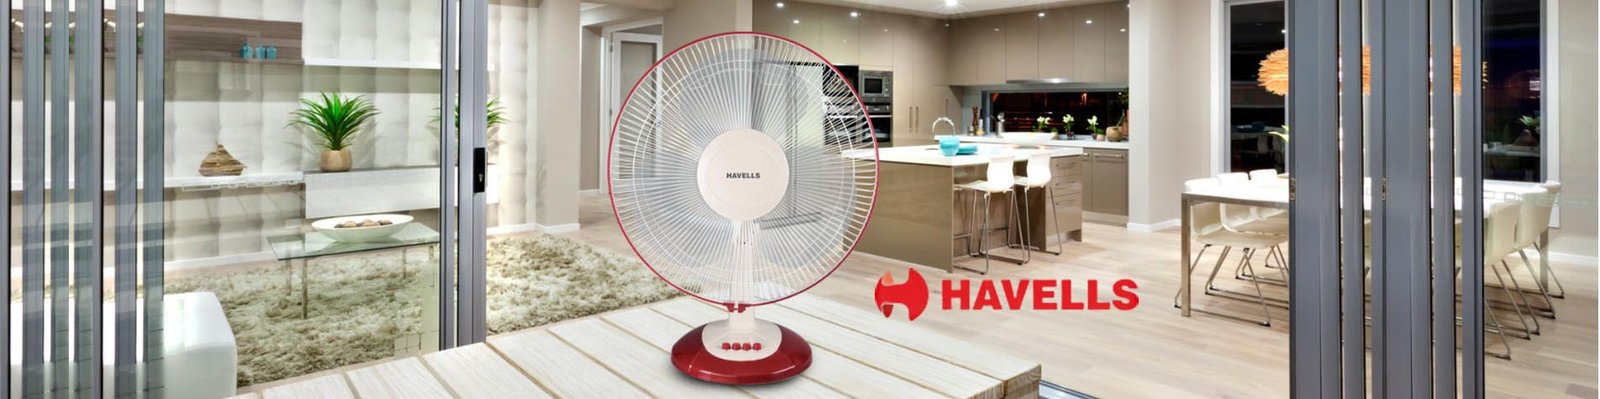 havells table fan banner 1